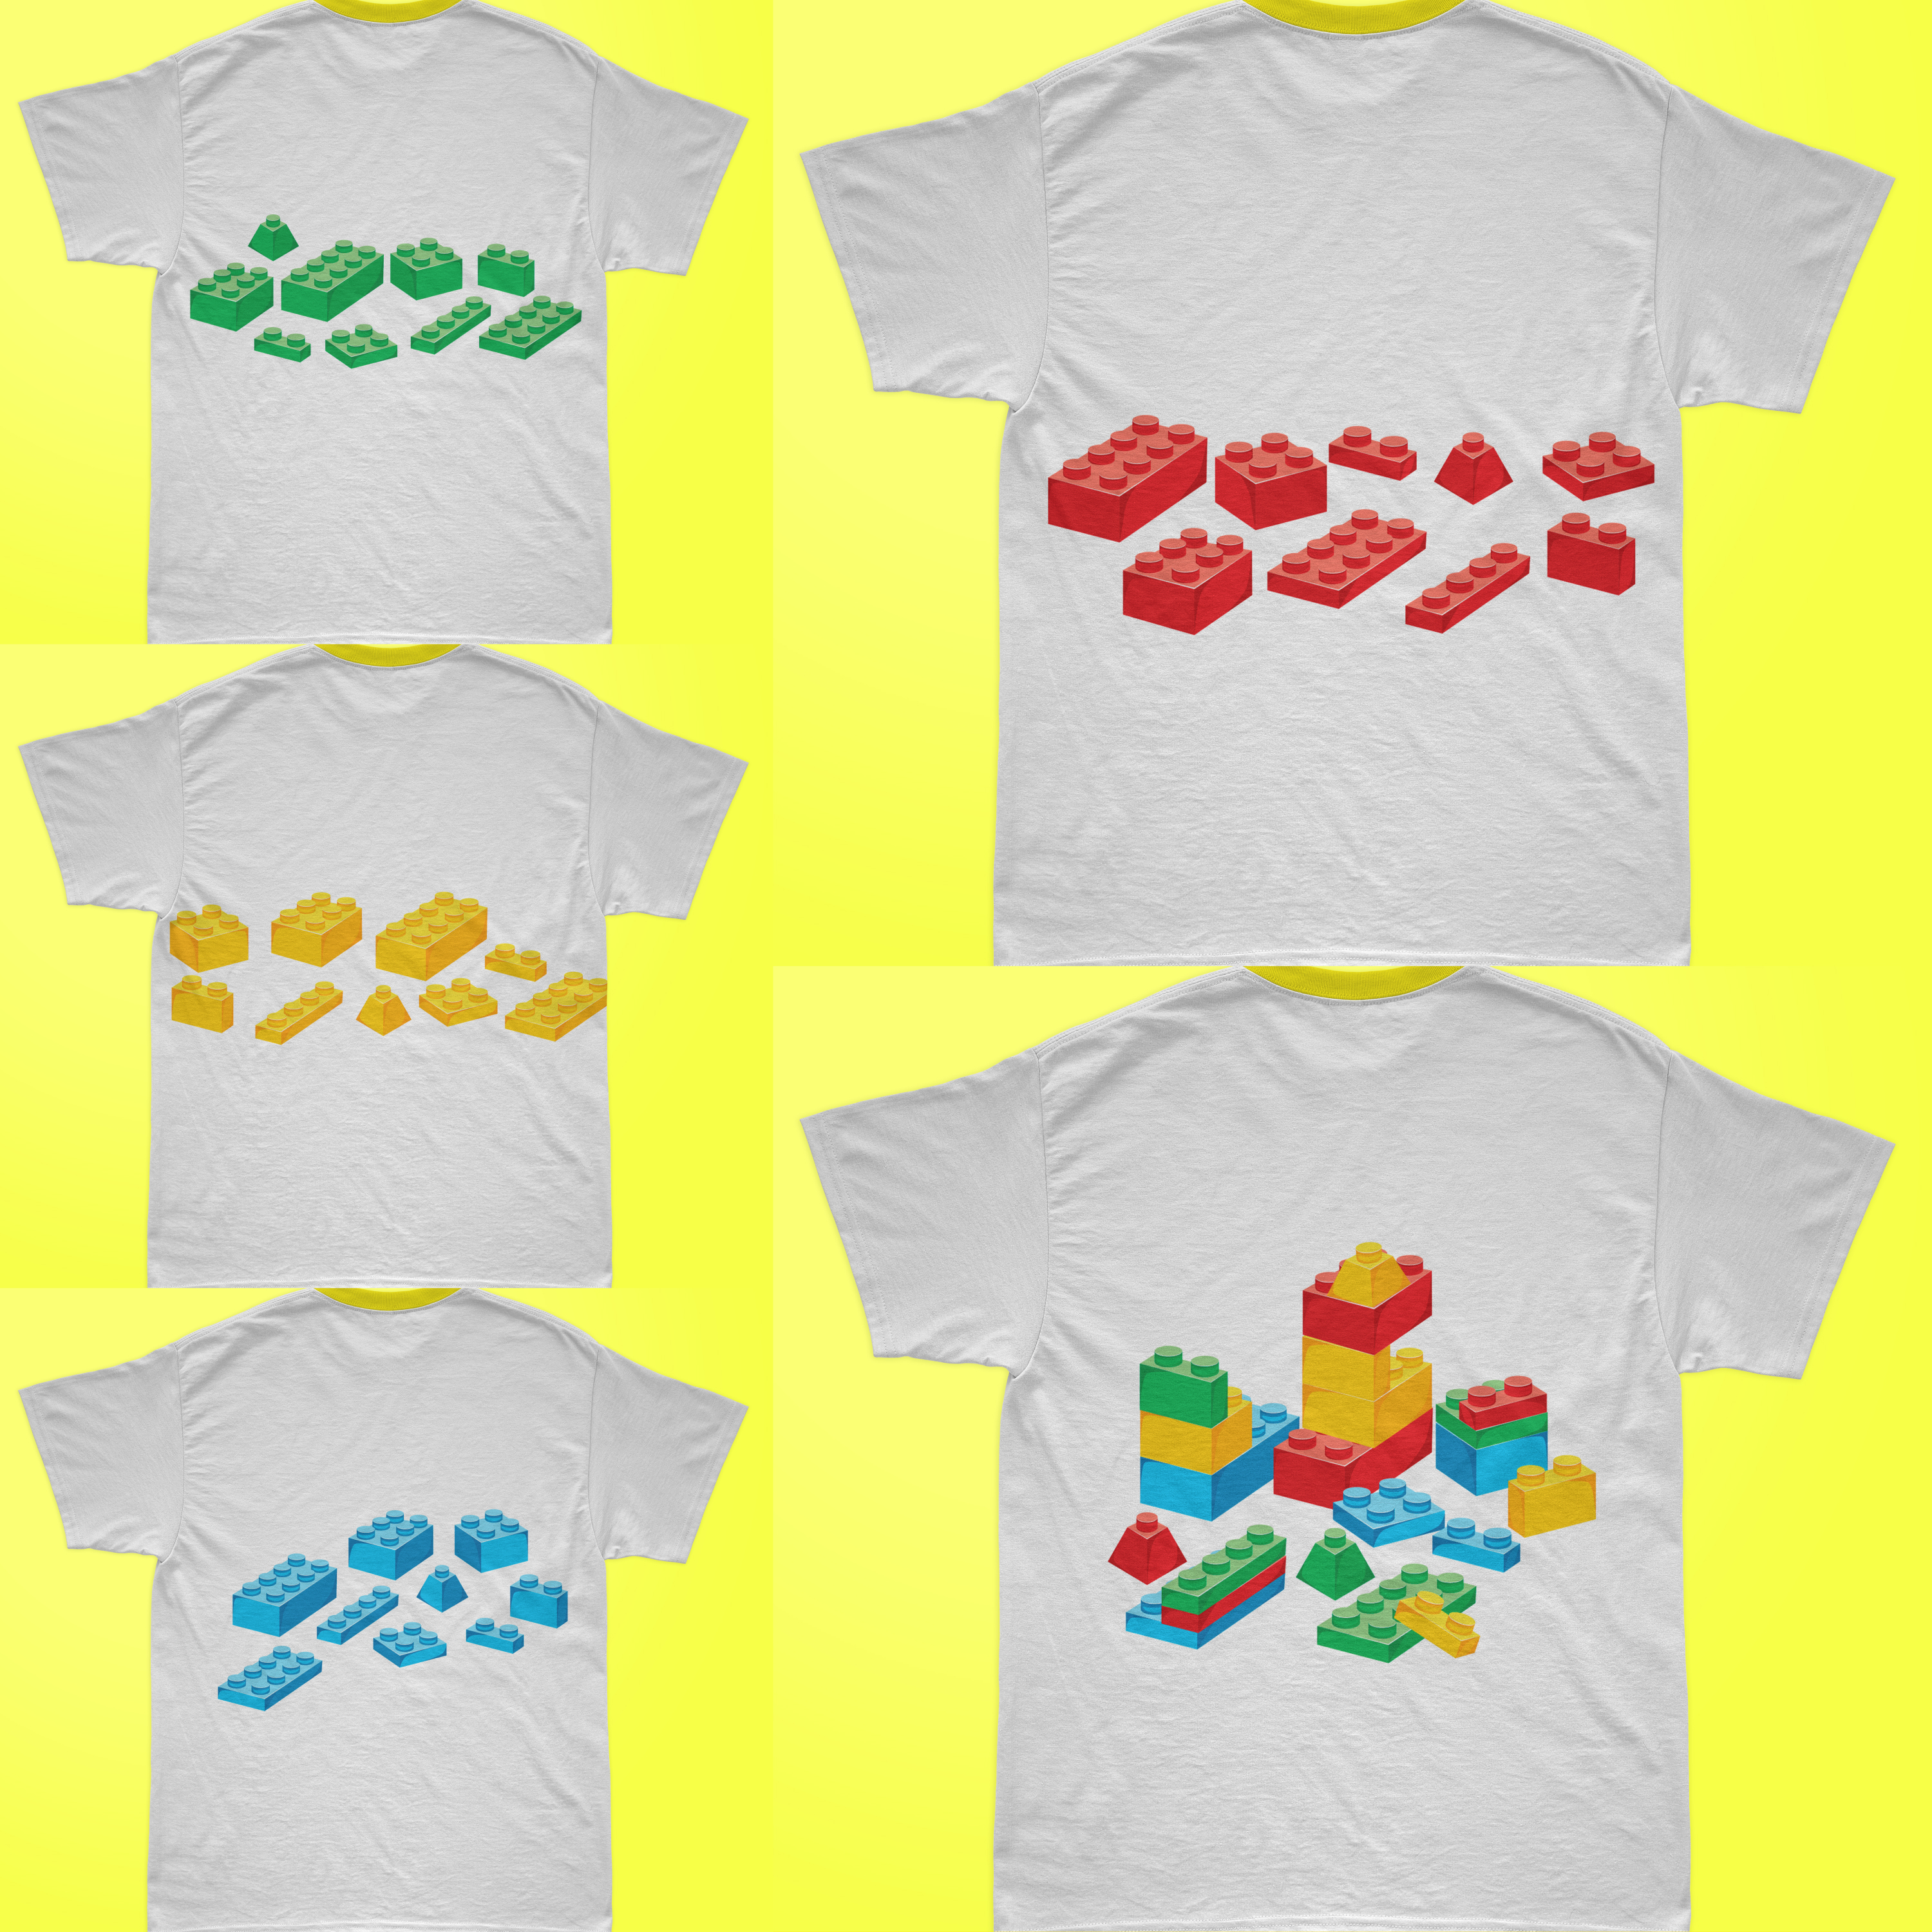 Various Lego images on T-shirts.